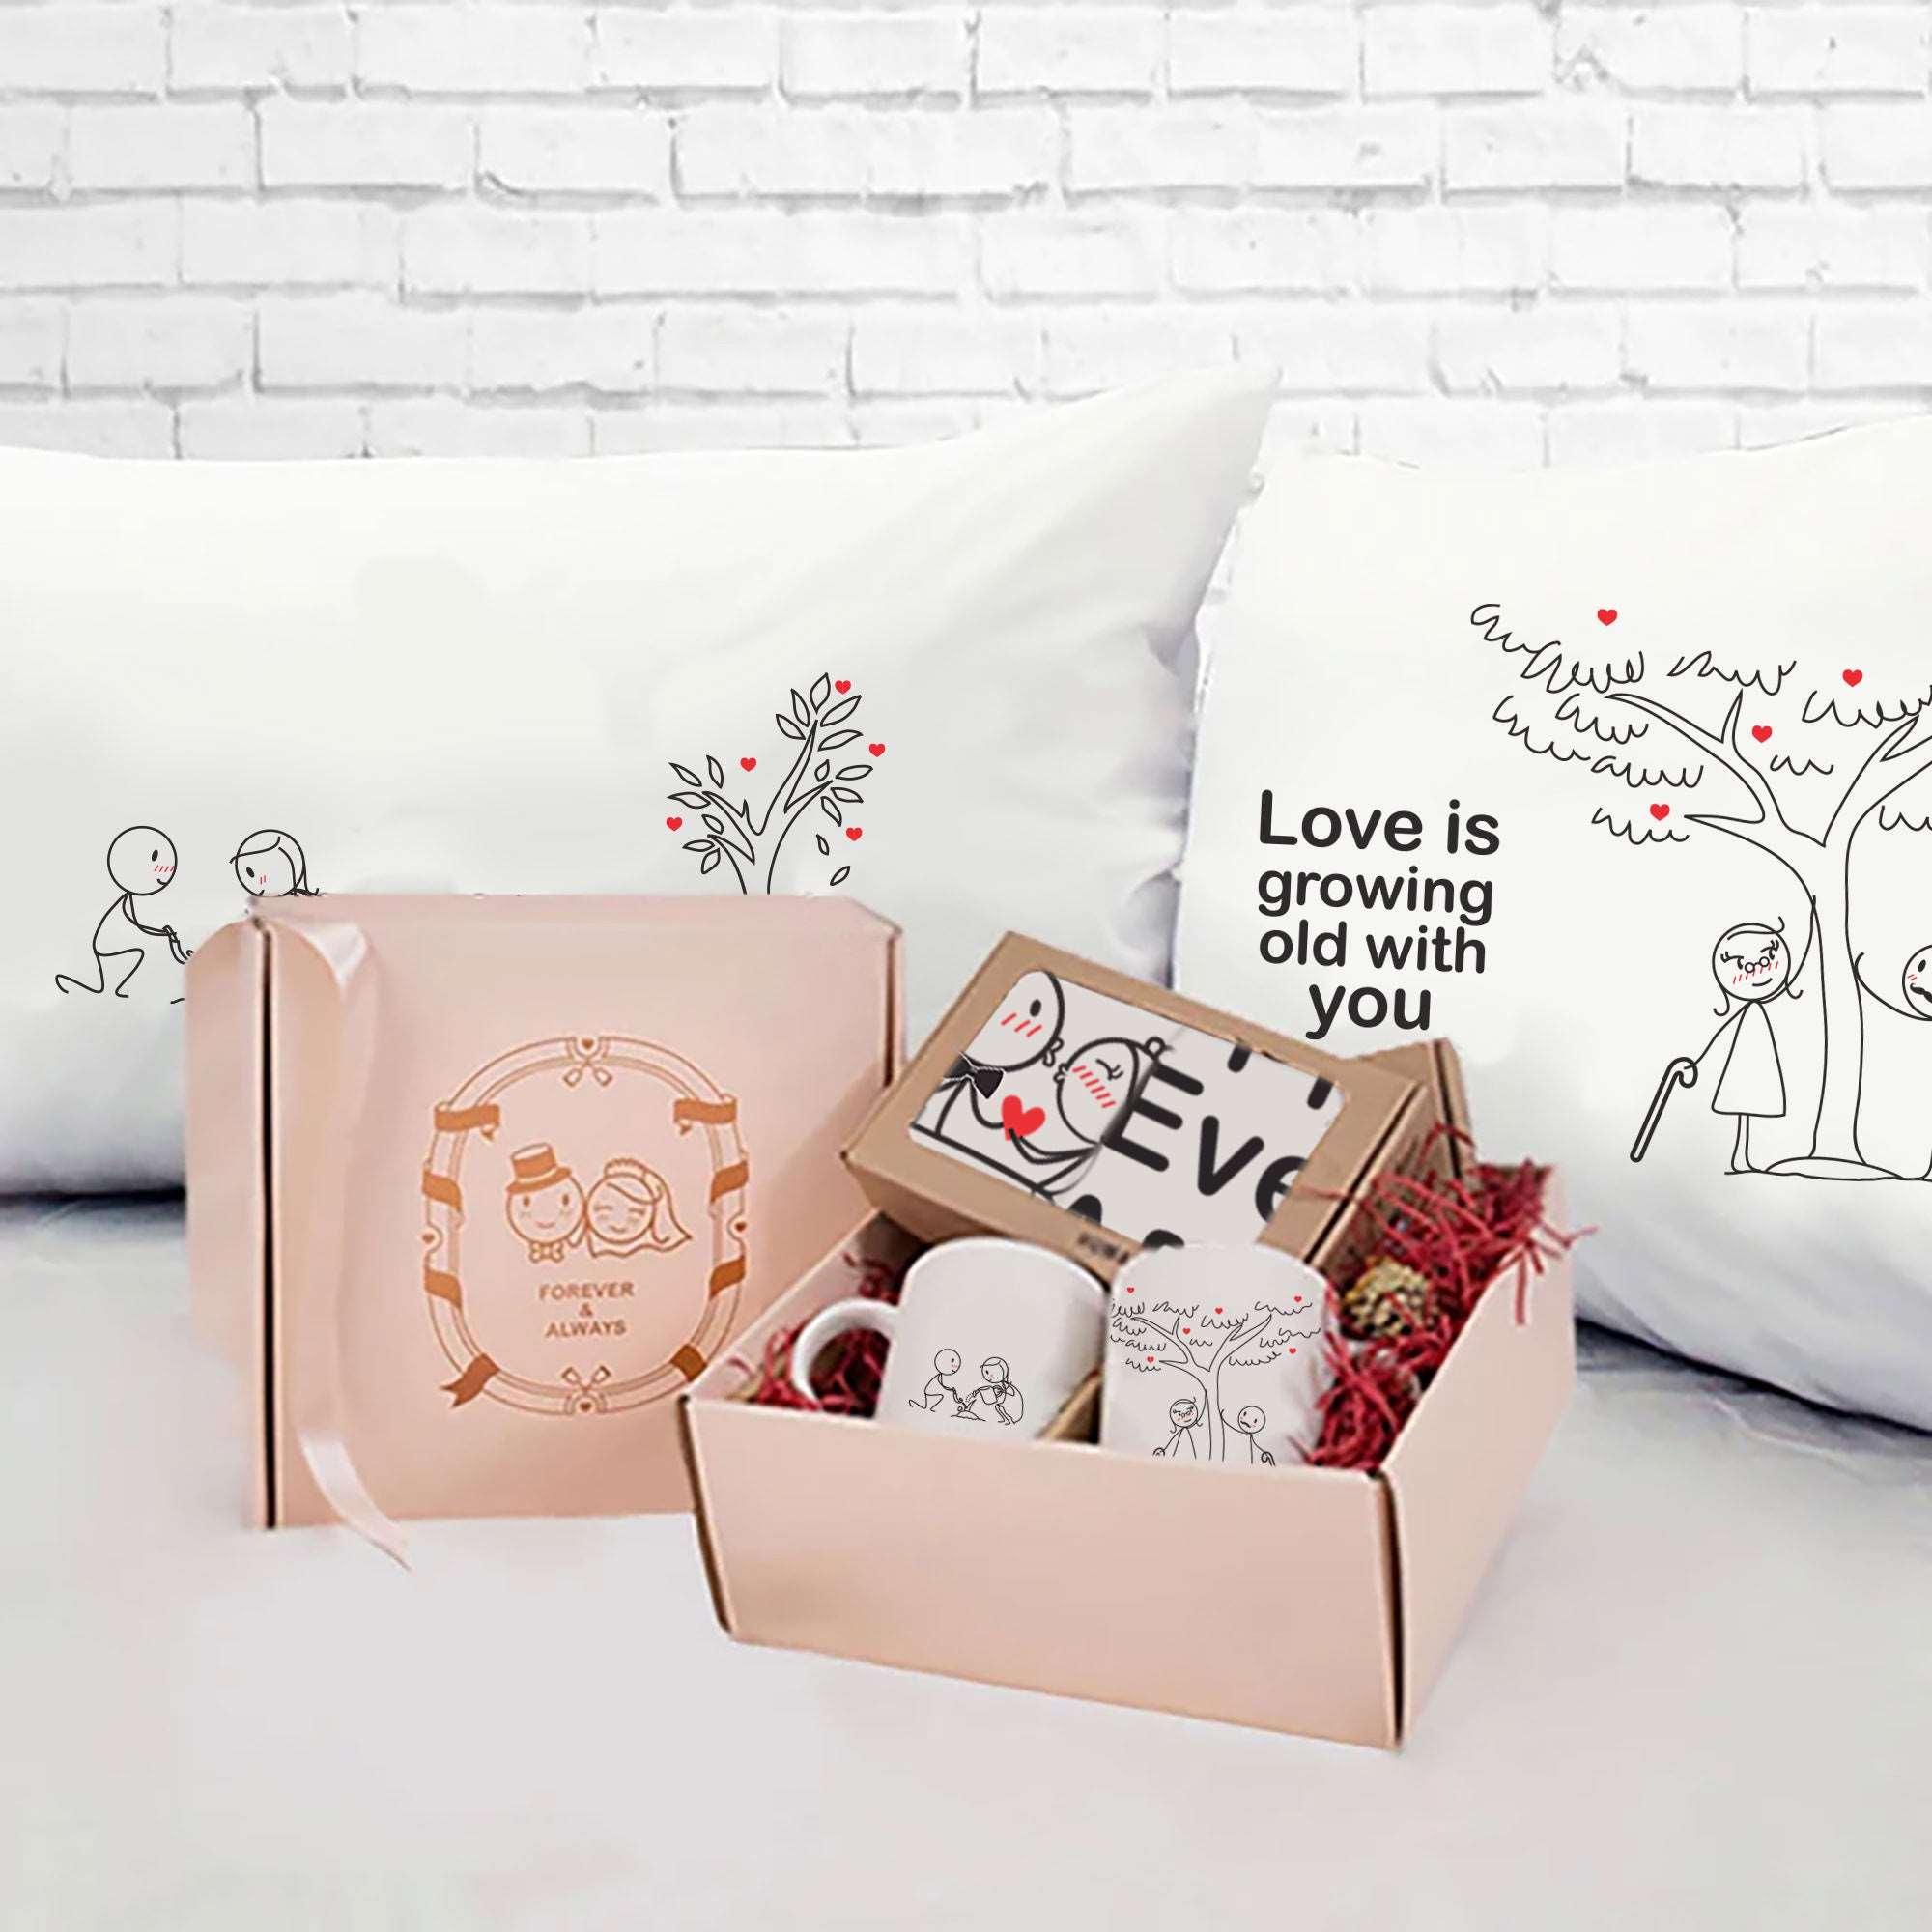 Love is Growing Old with You gift set